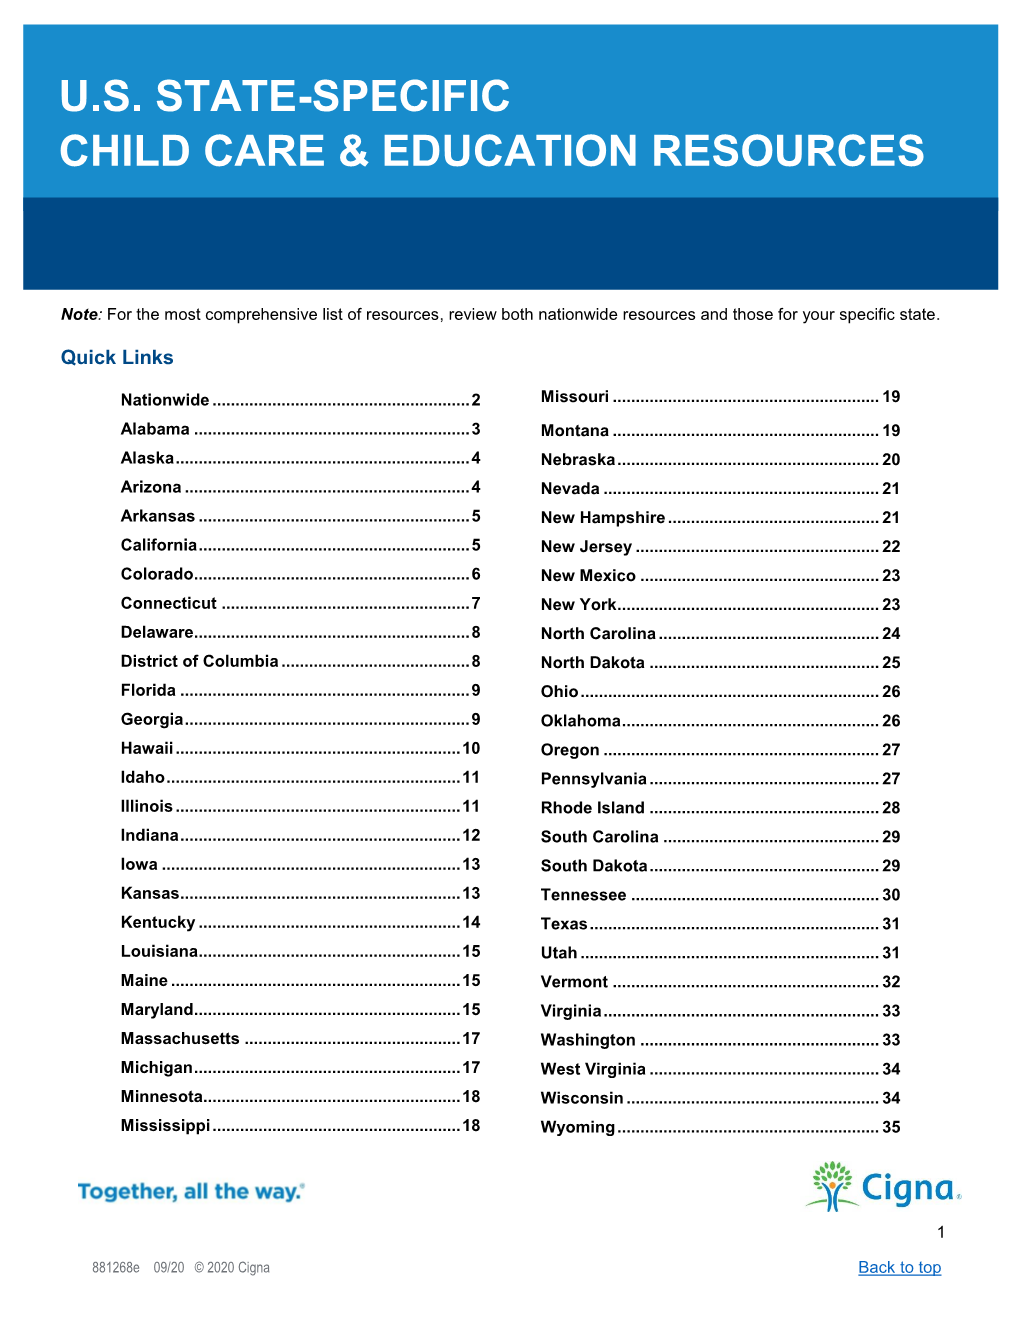 U.S. State-Specific Child Care & Education Resources